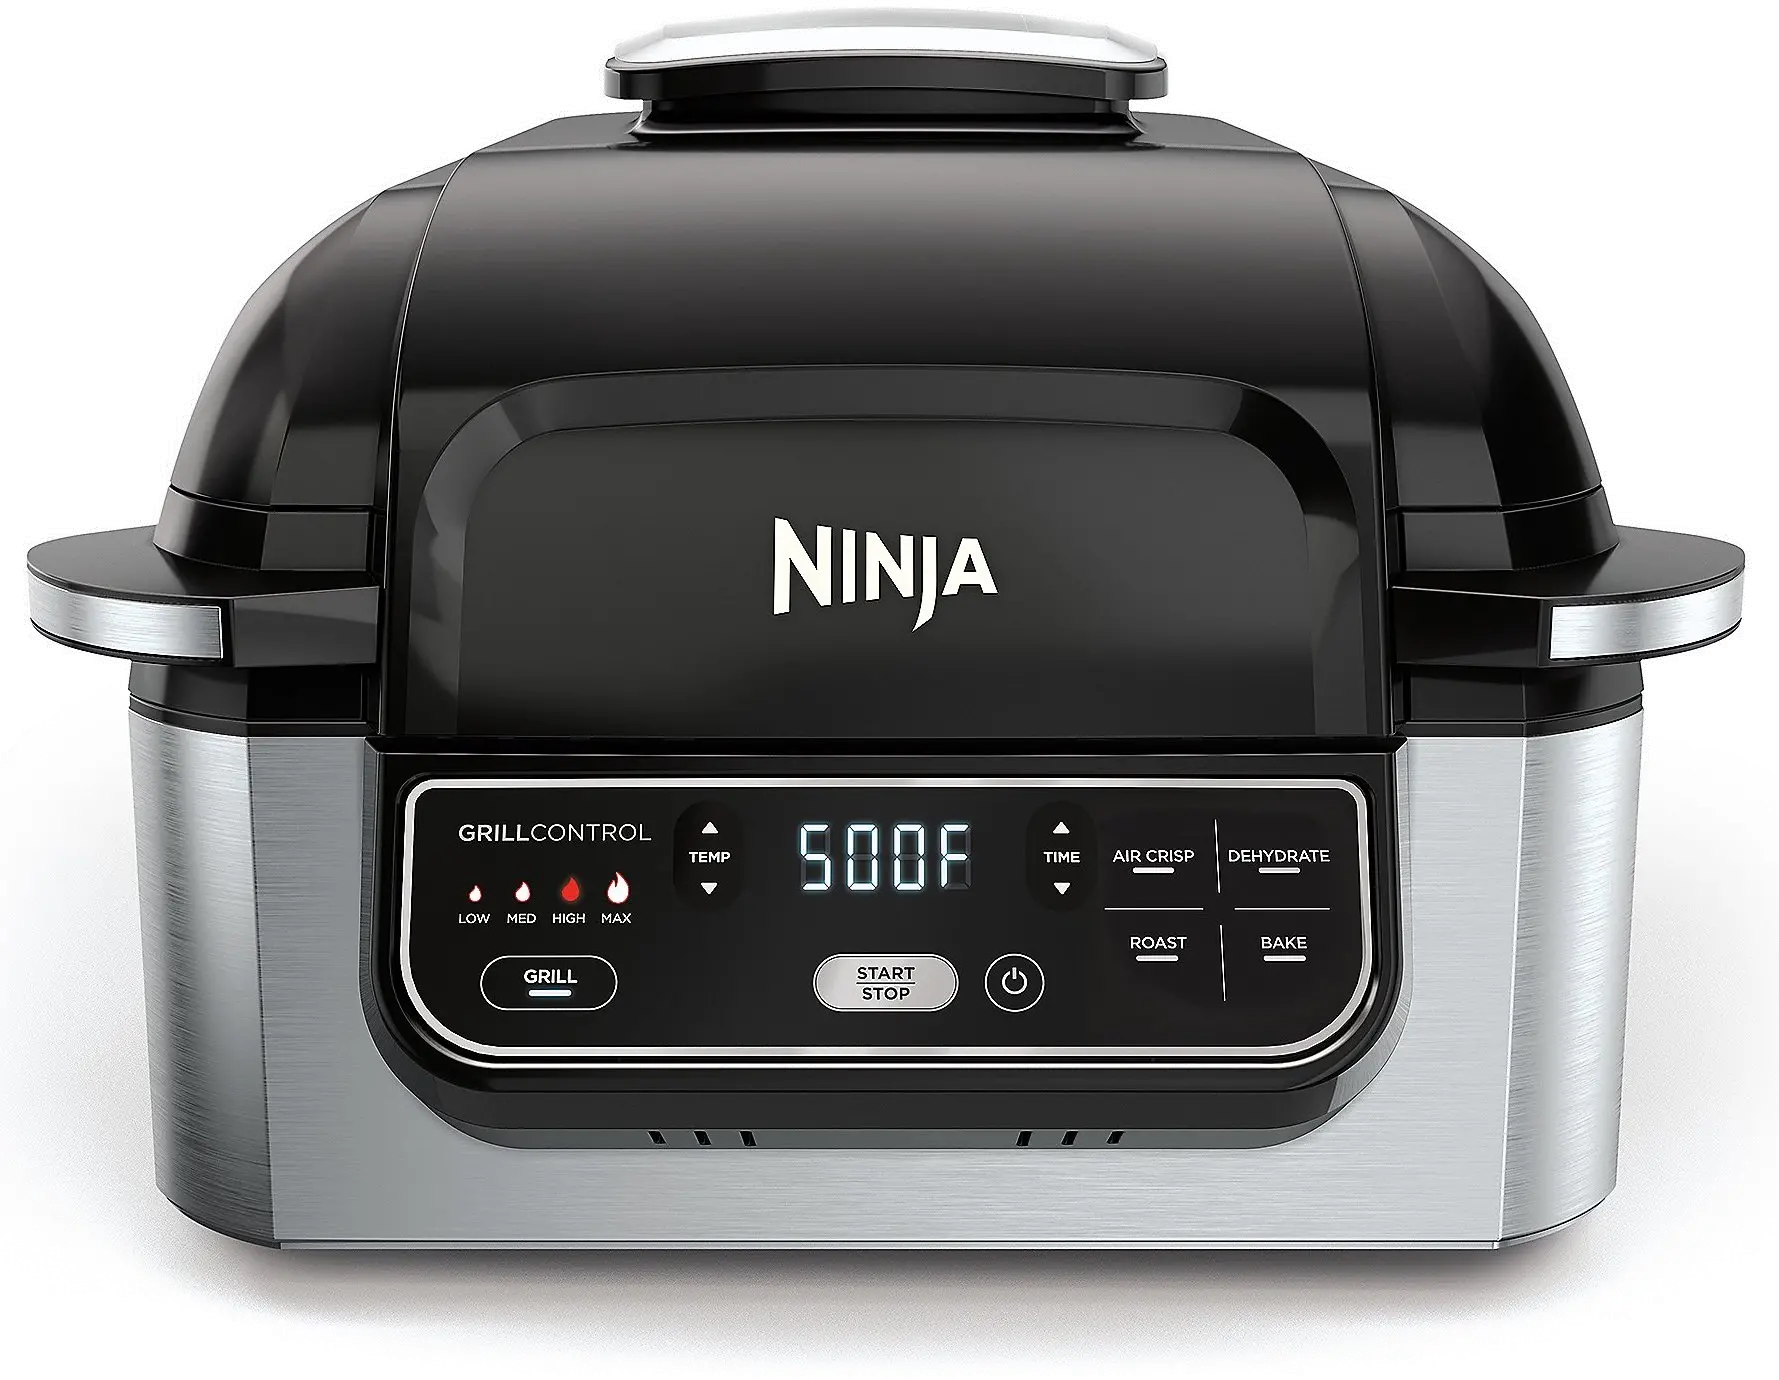 https://static.rcwilley.com/products/112059376/Ninja-Foodi-5-in-1-Indoor-Grill-with-4-Quart-Air-Fryer-rcwilley-image1.webp